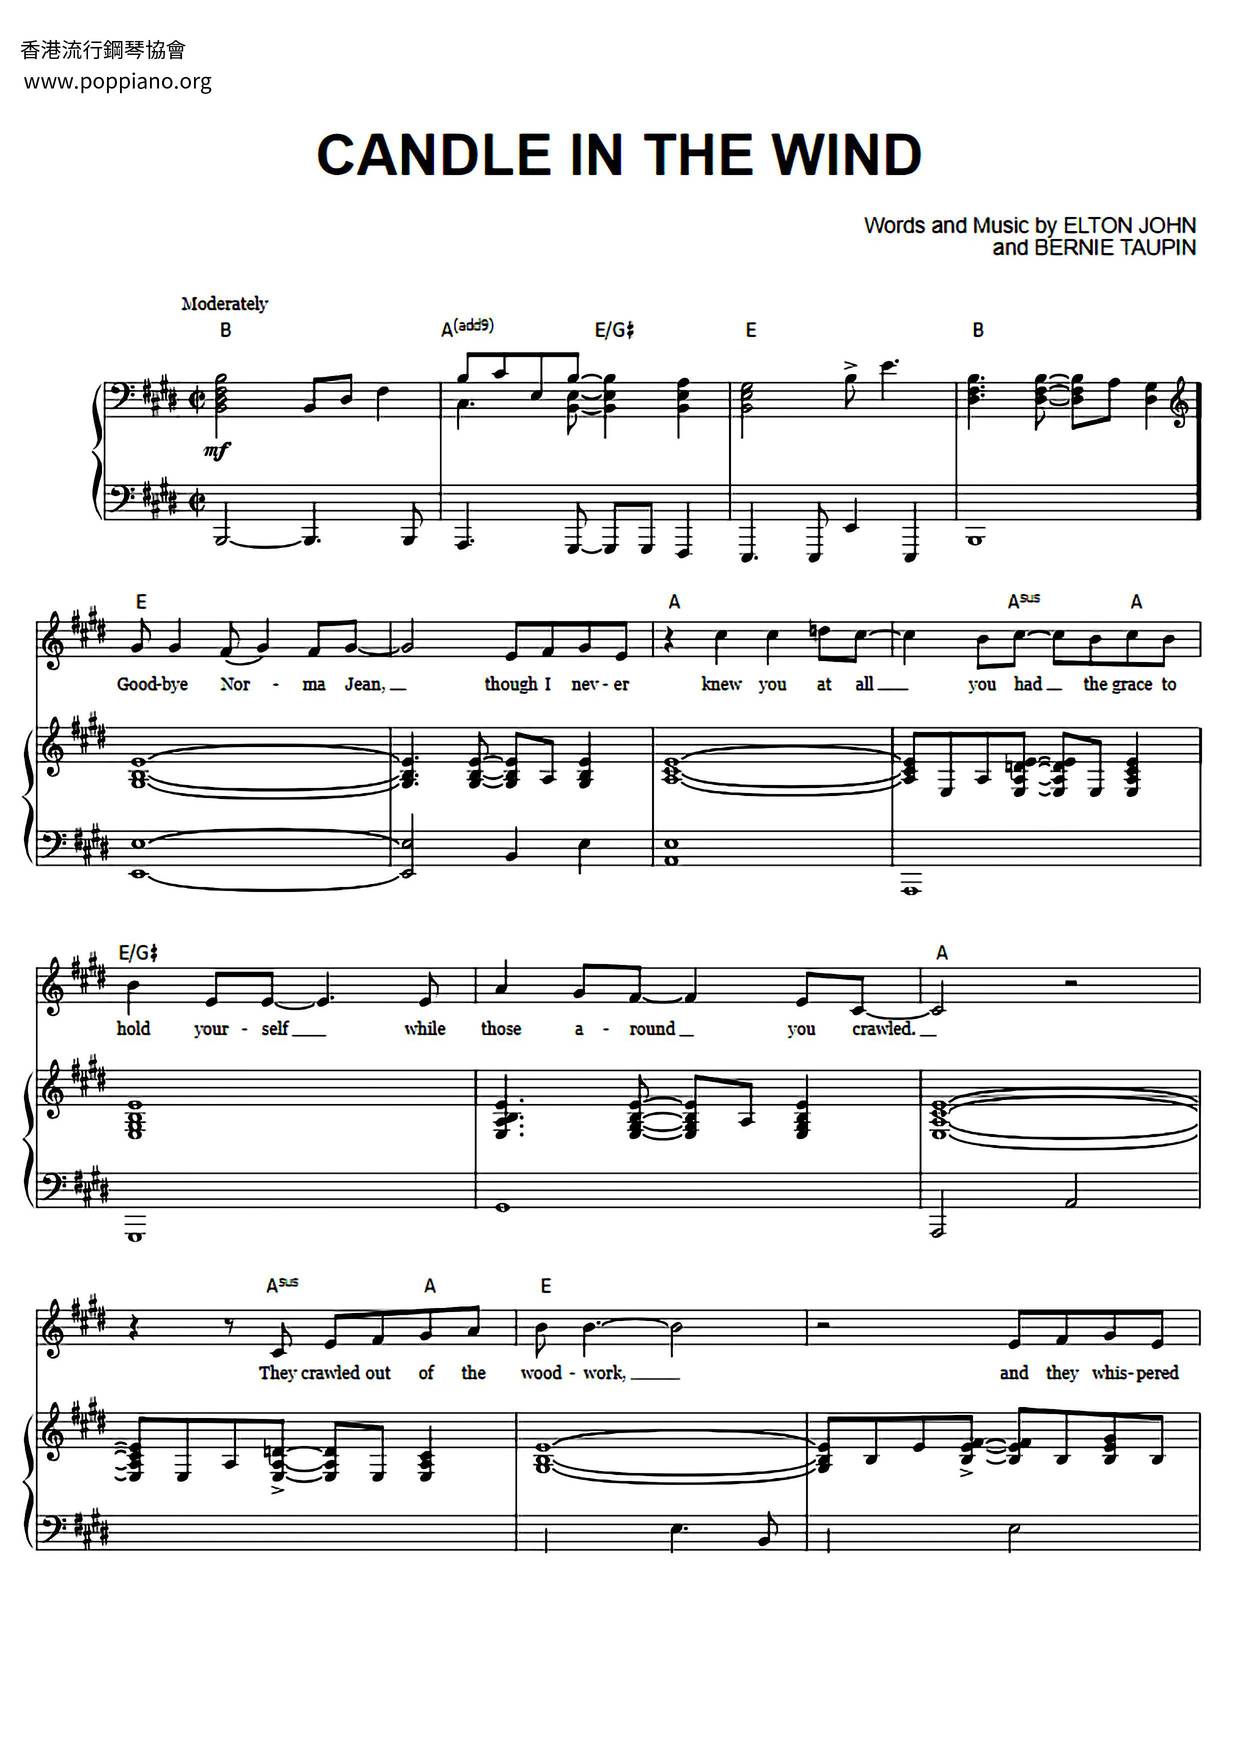 Candle In The Wind Score